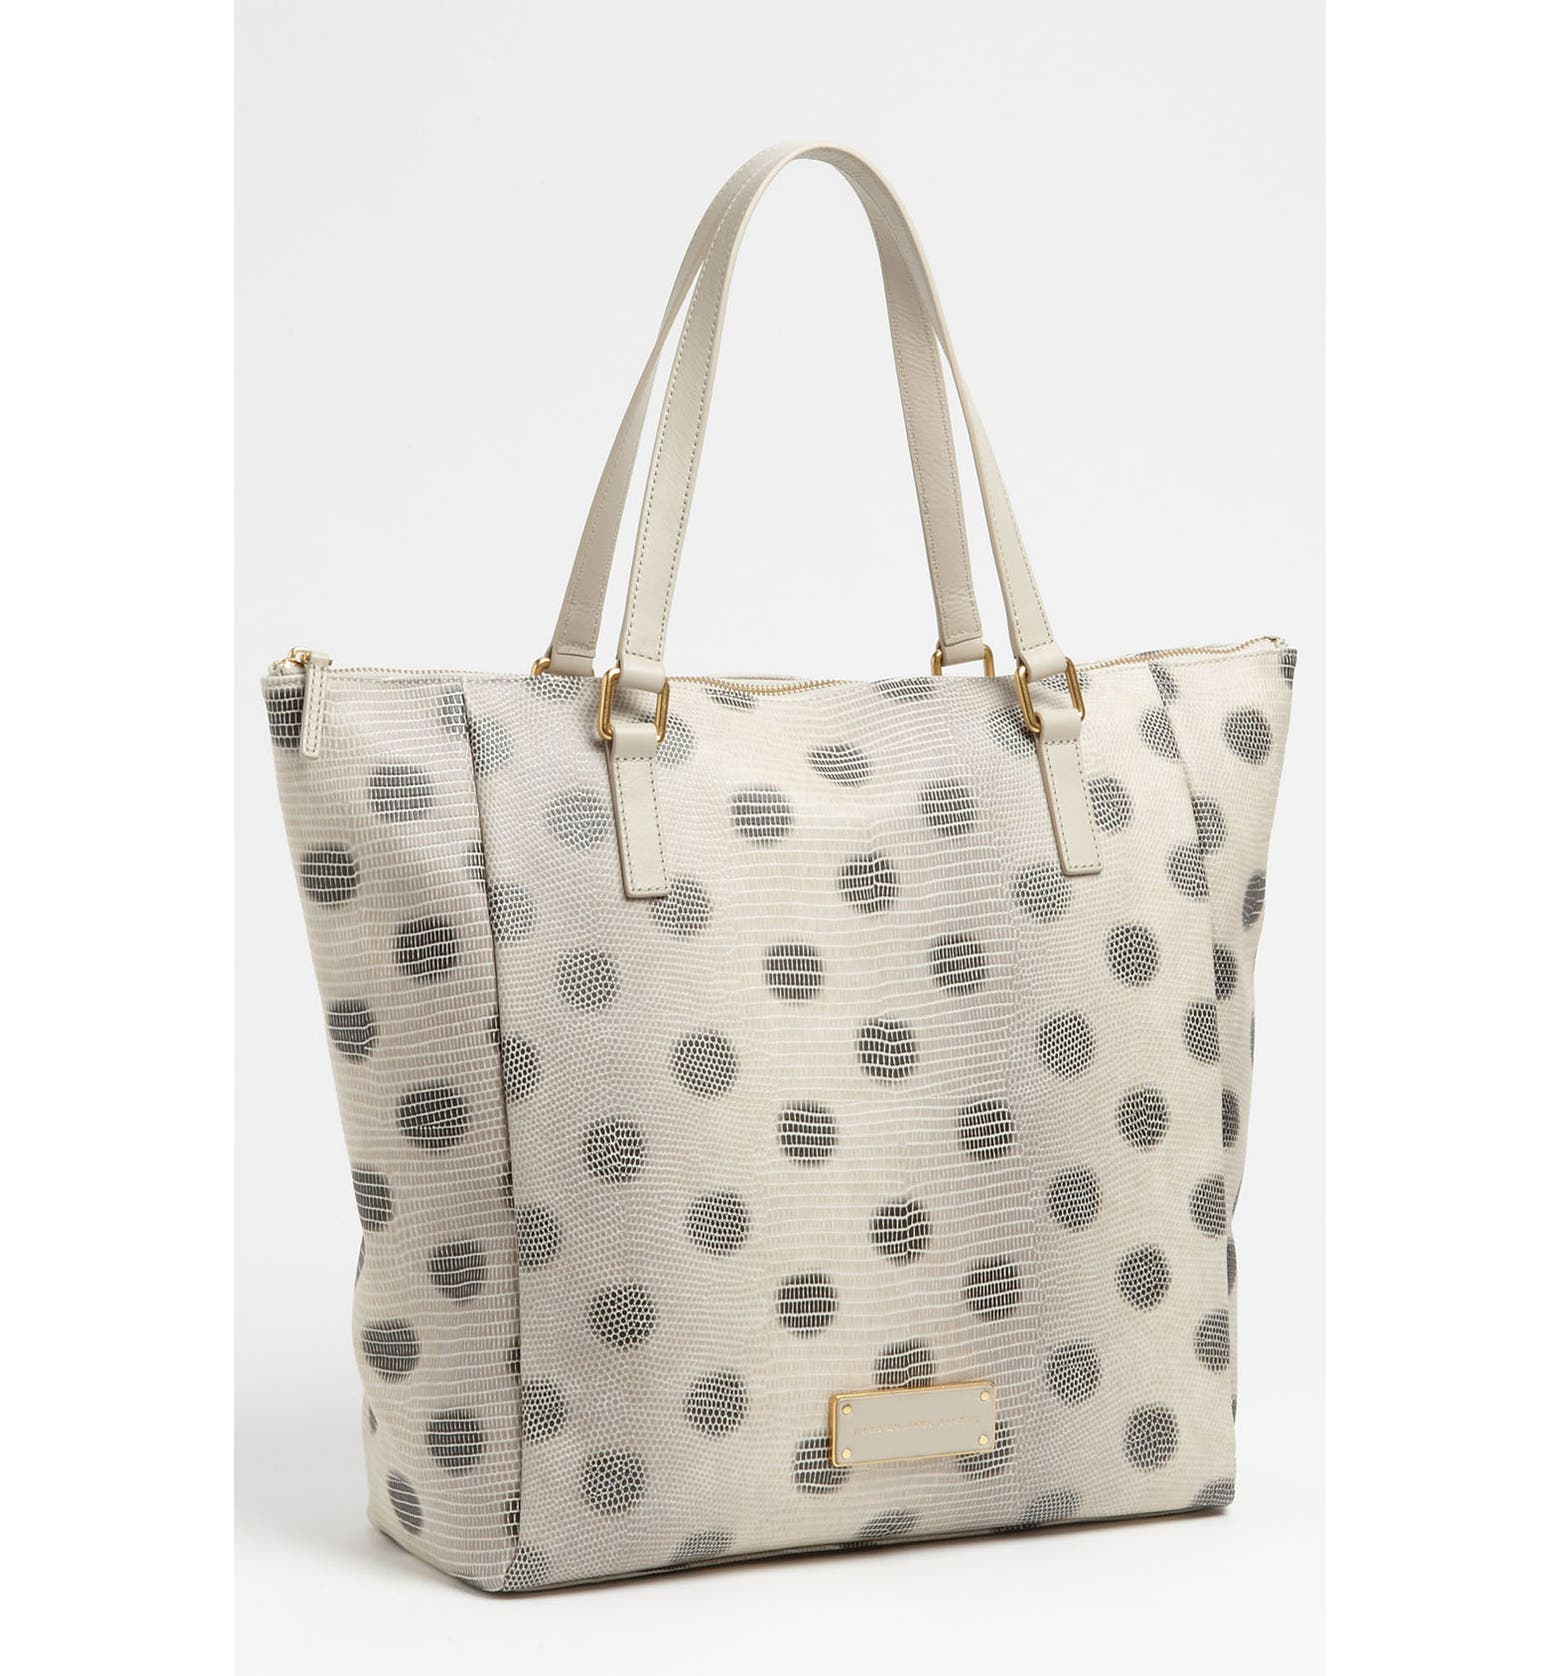 MARC BY MARC JACOBS 'Take Me - Lizzie Spot' Embossed Tote | Nordstrom